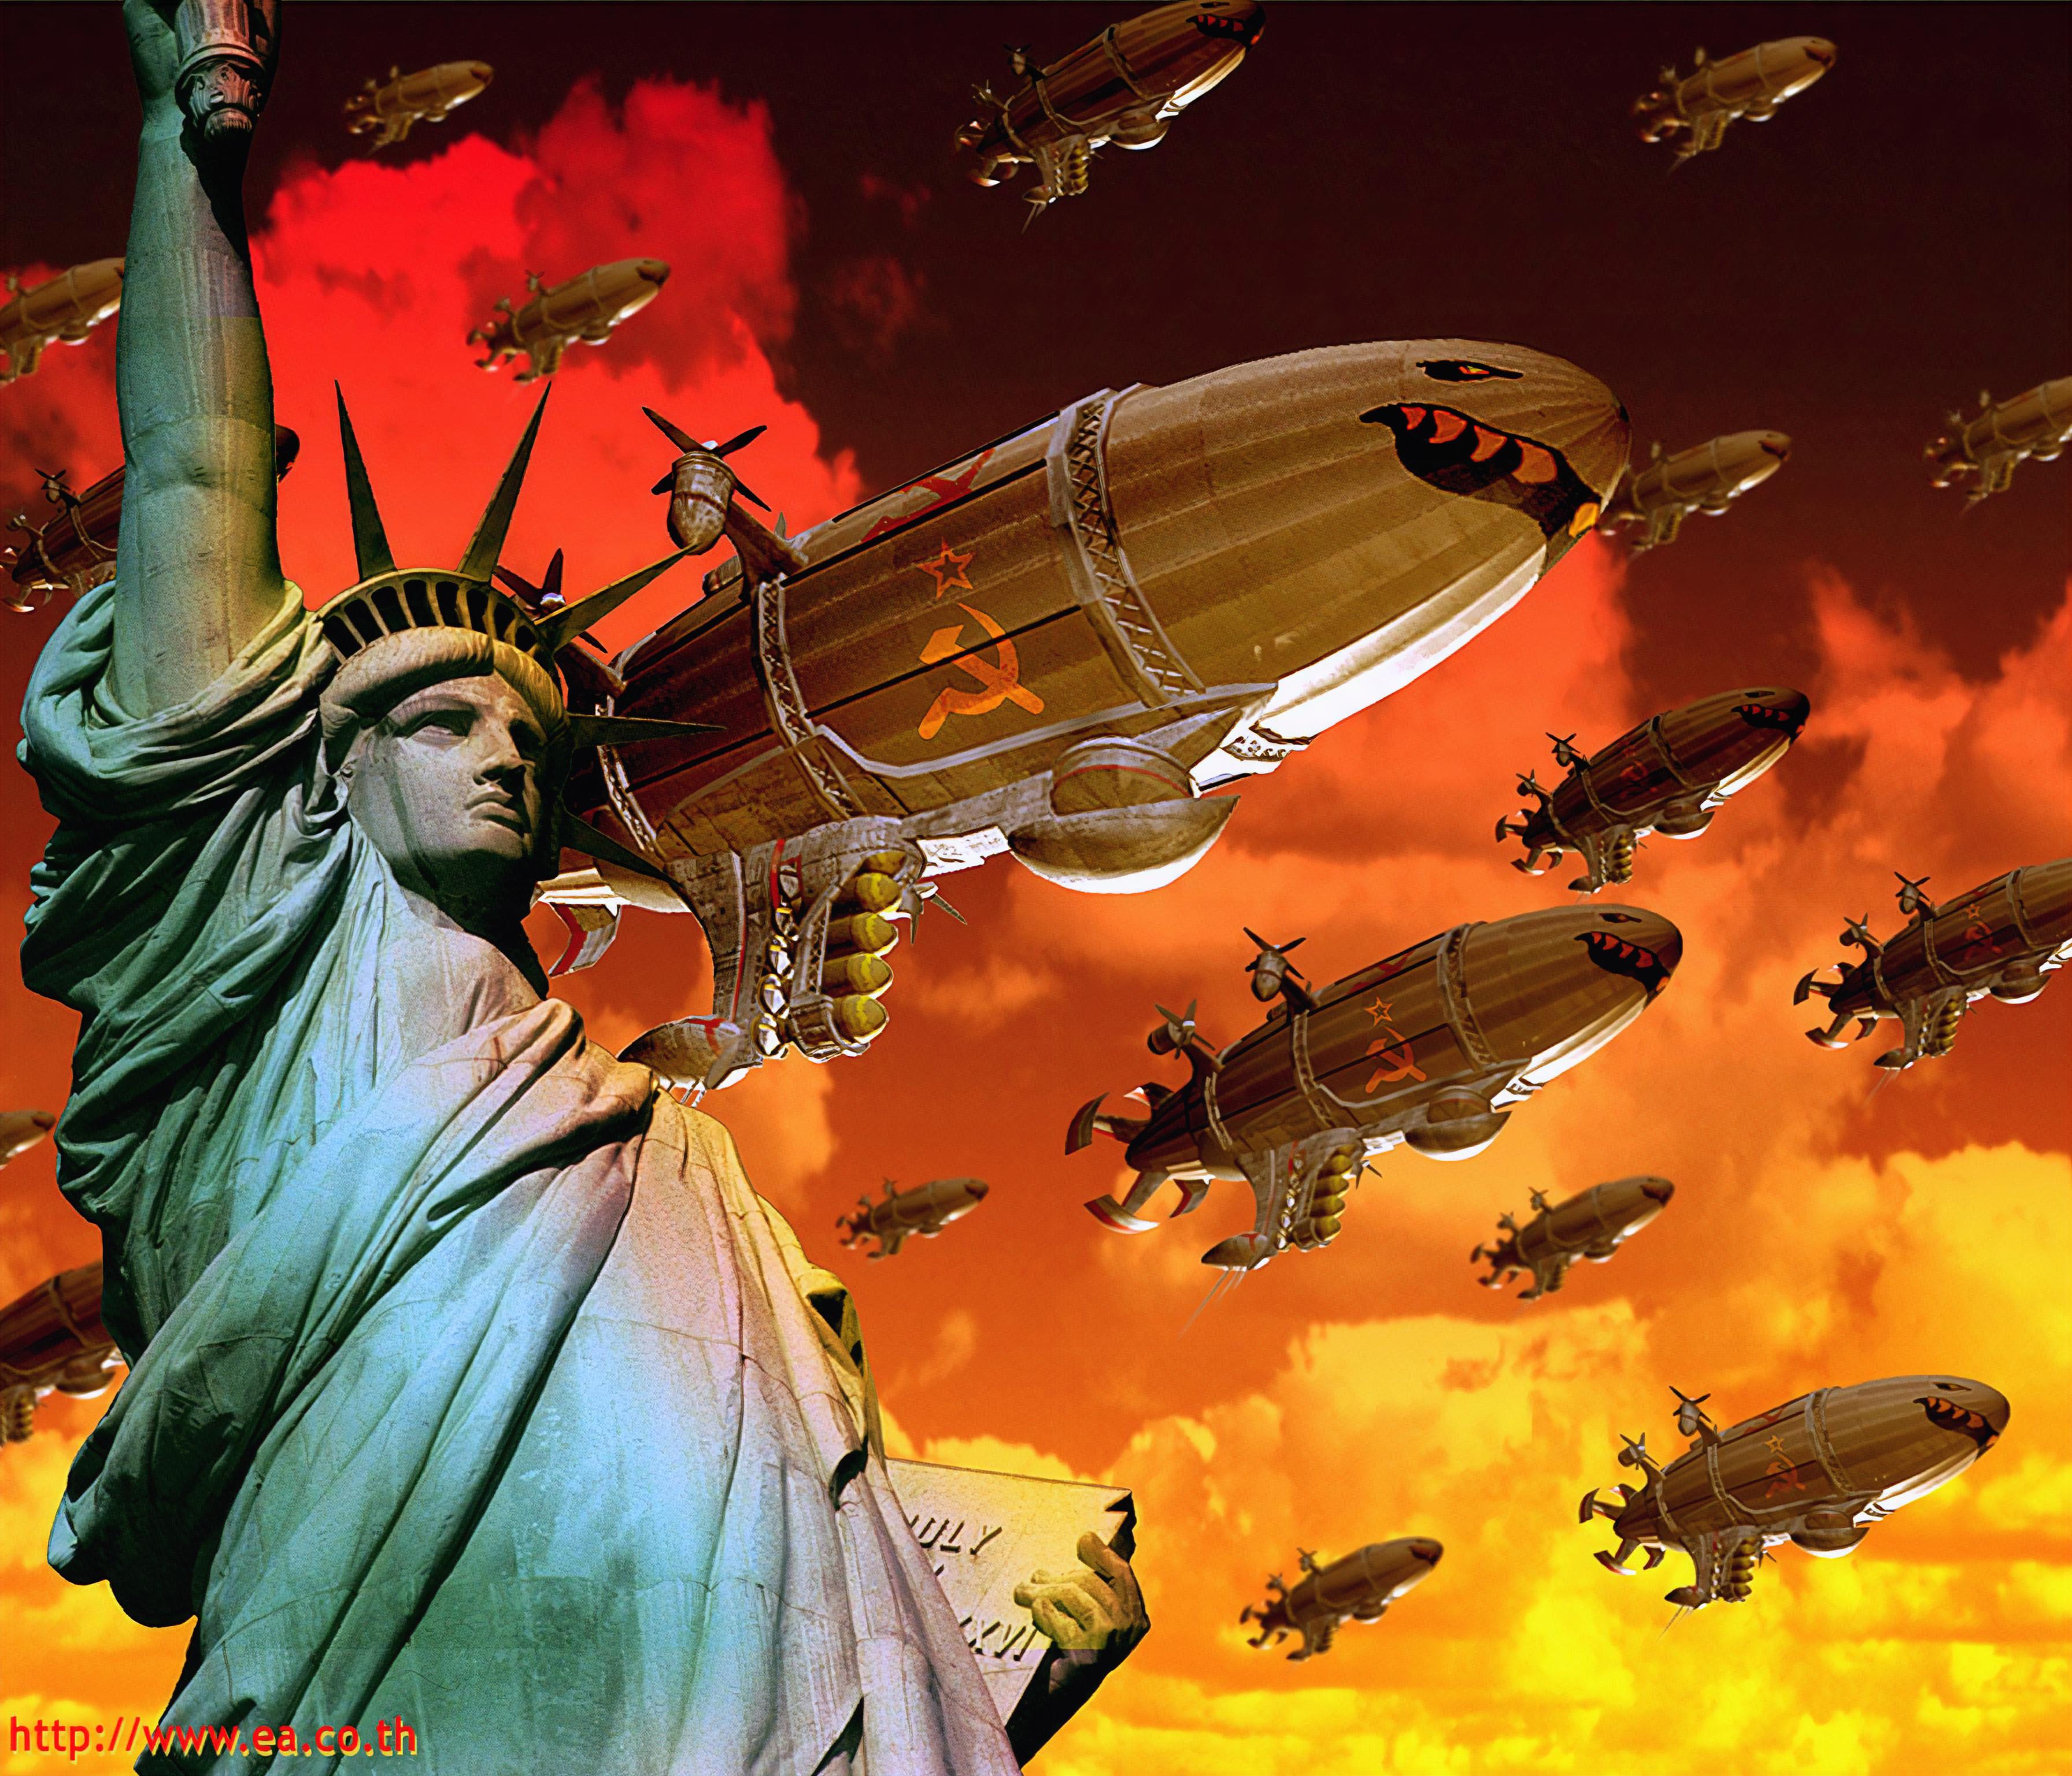 Command Conquer Red Alert 2 Statue Of Liberty USSR Zeppelin 3584x3072